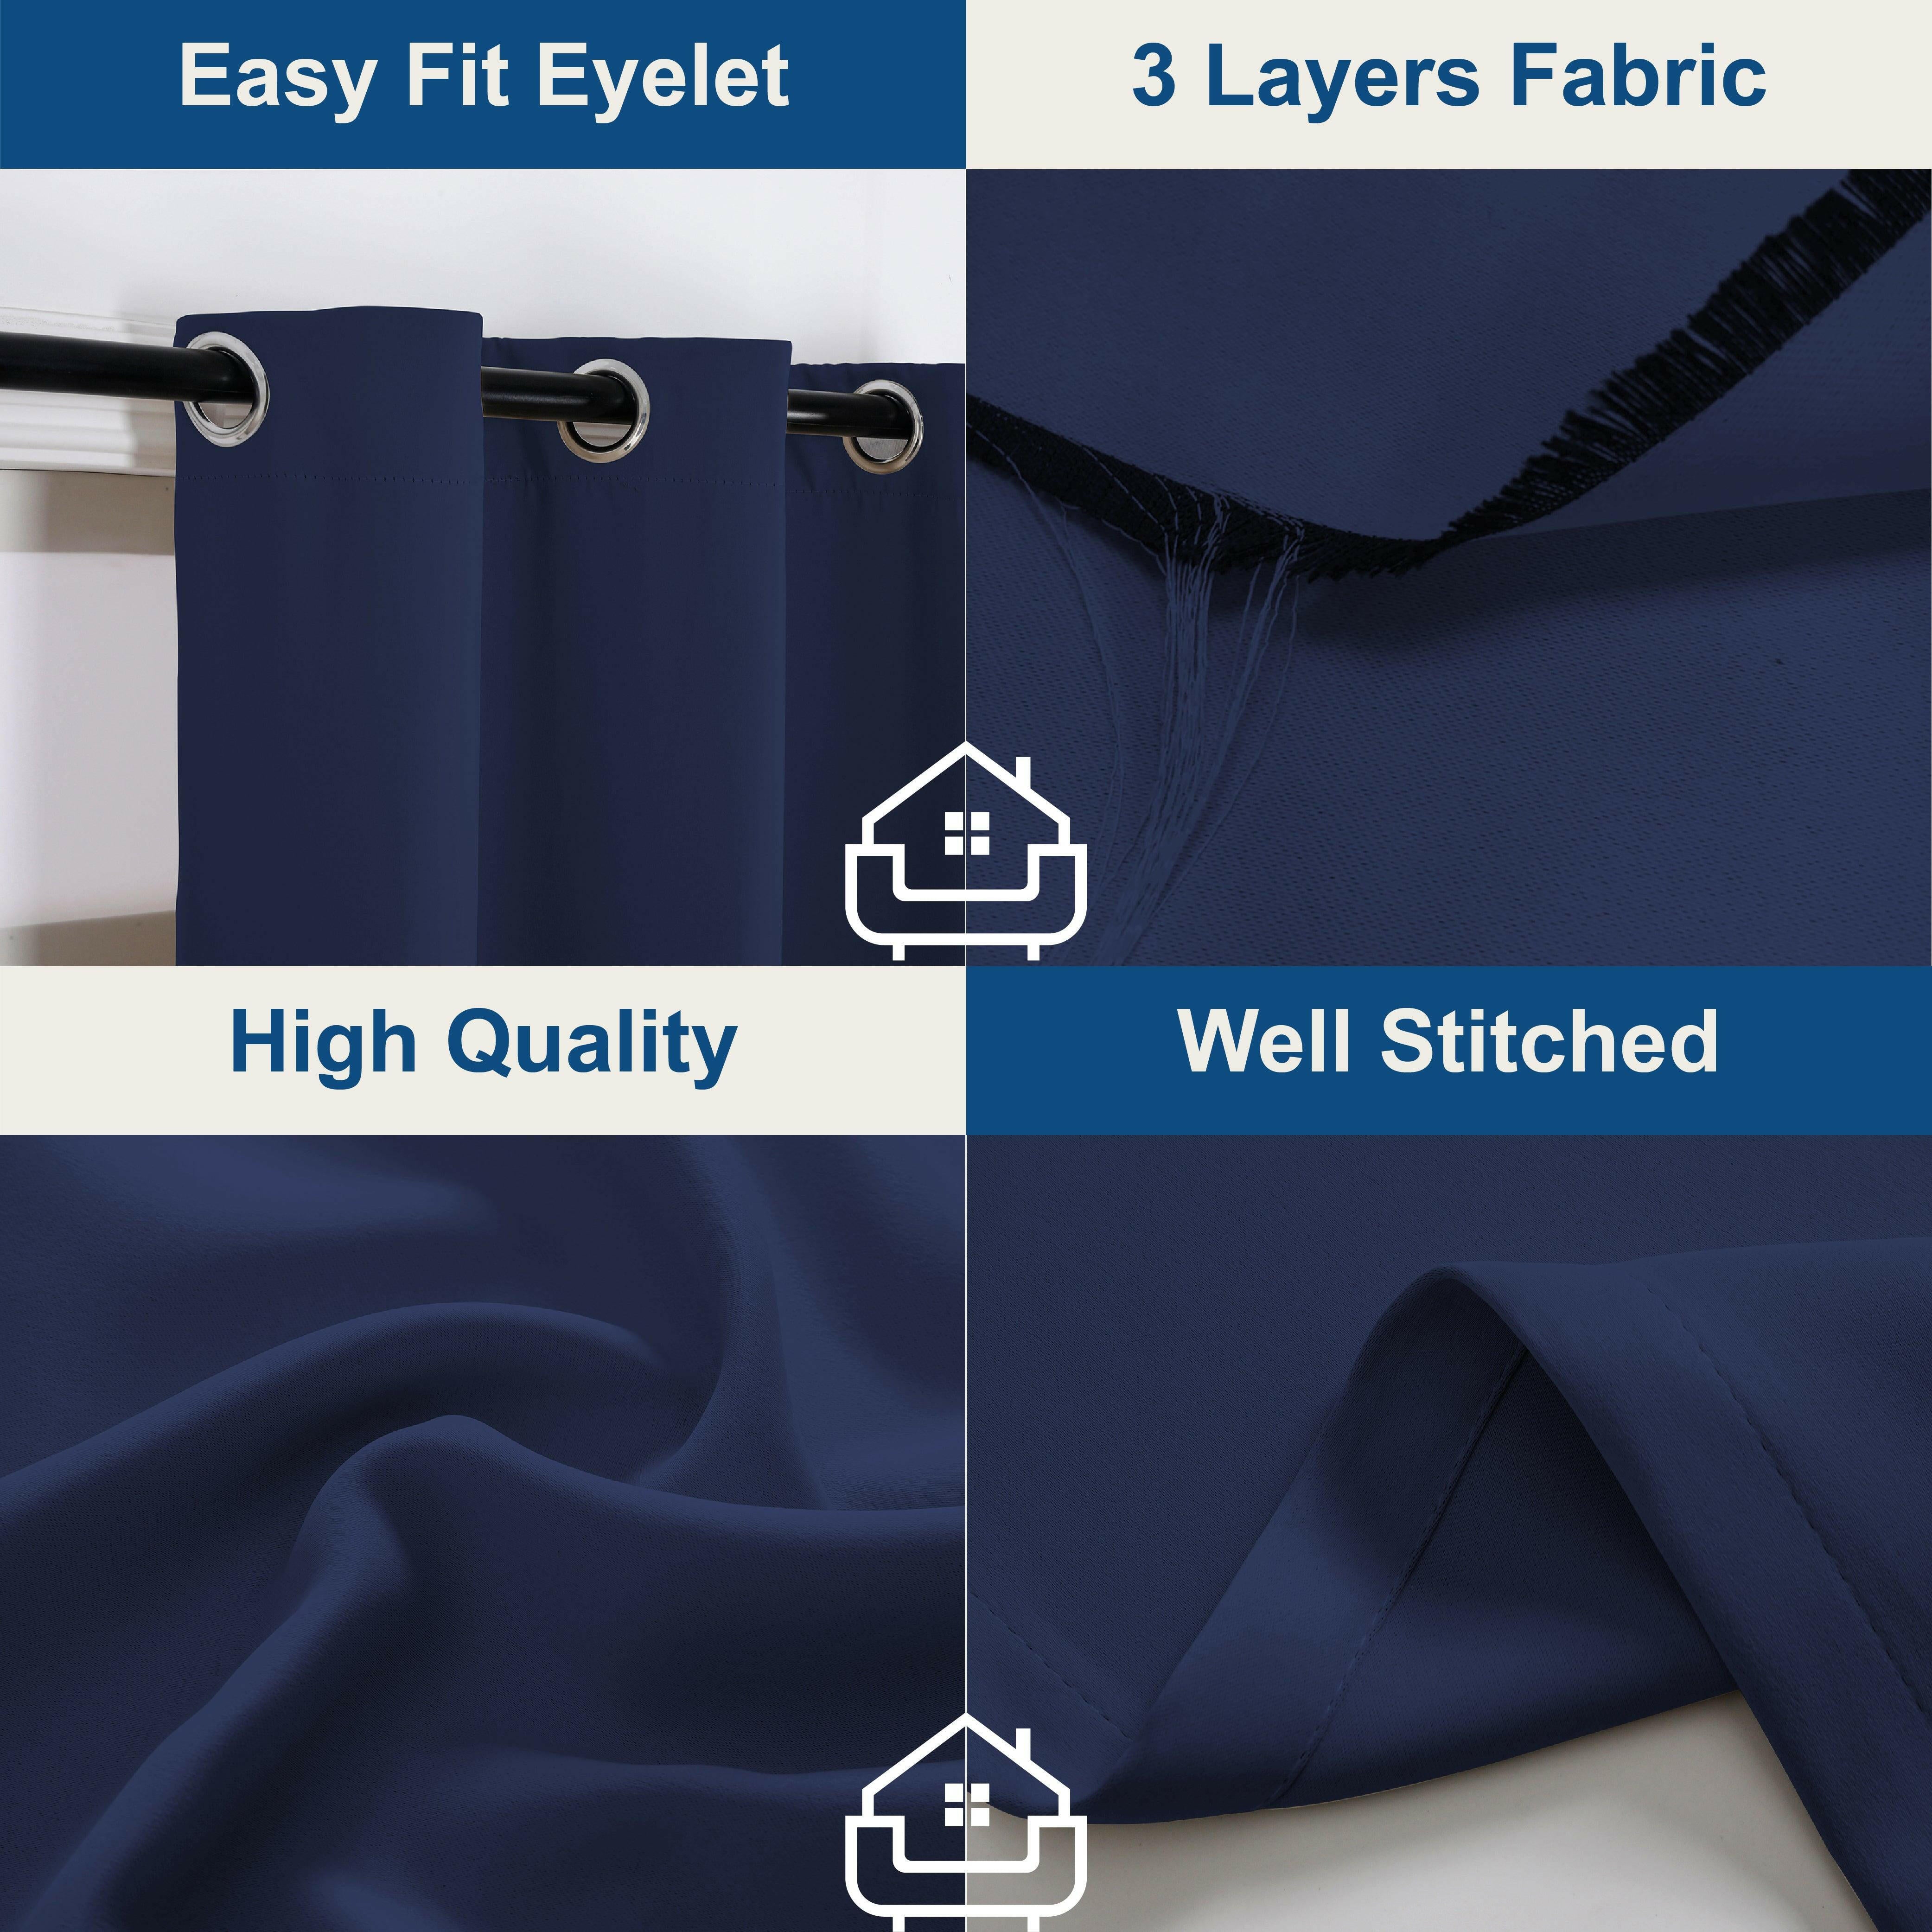 Hyper Cover 3-Layers Blockout Curtains Navy | Window Curtains | Brilliant Home Living